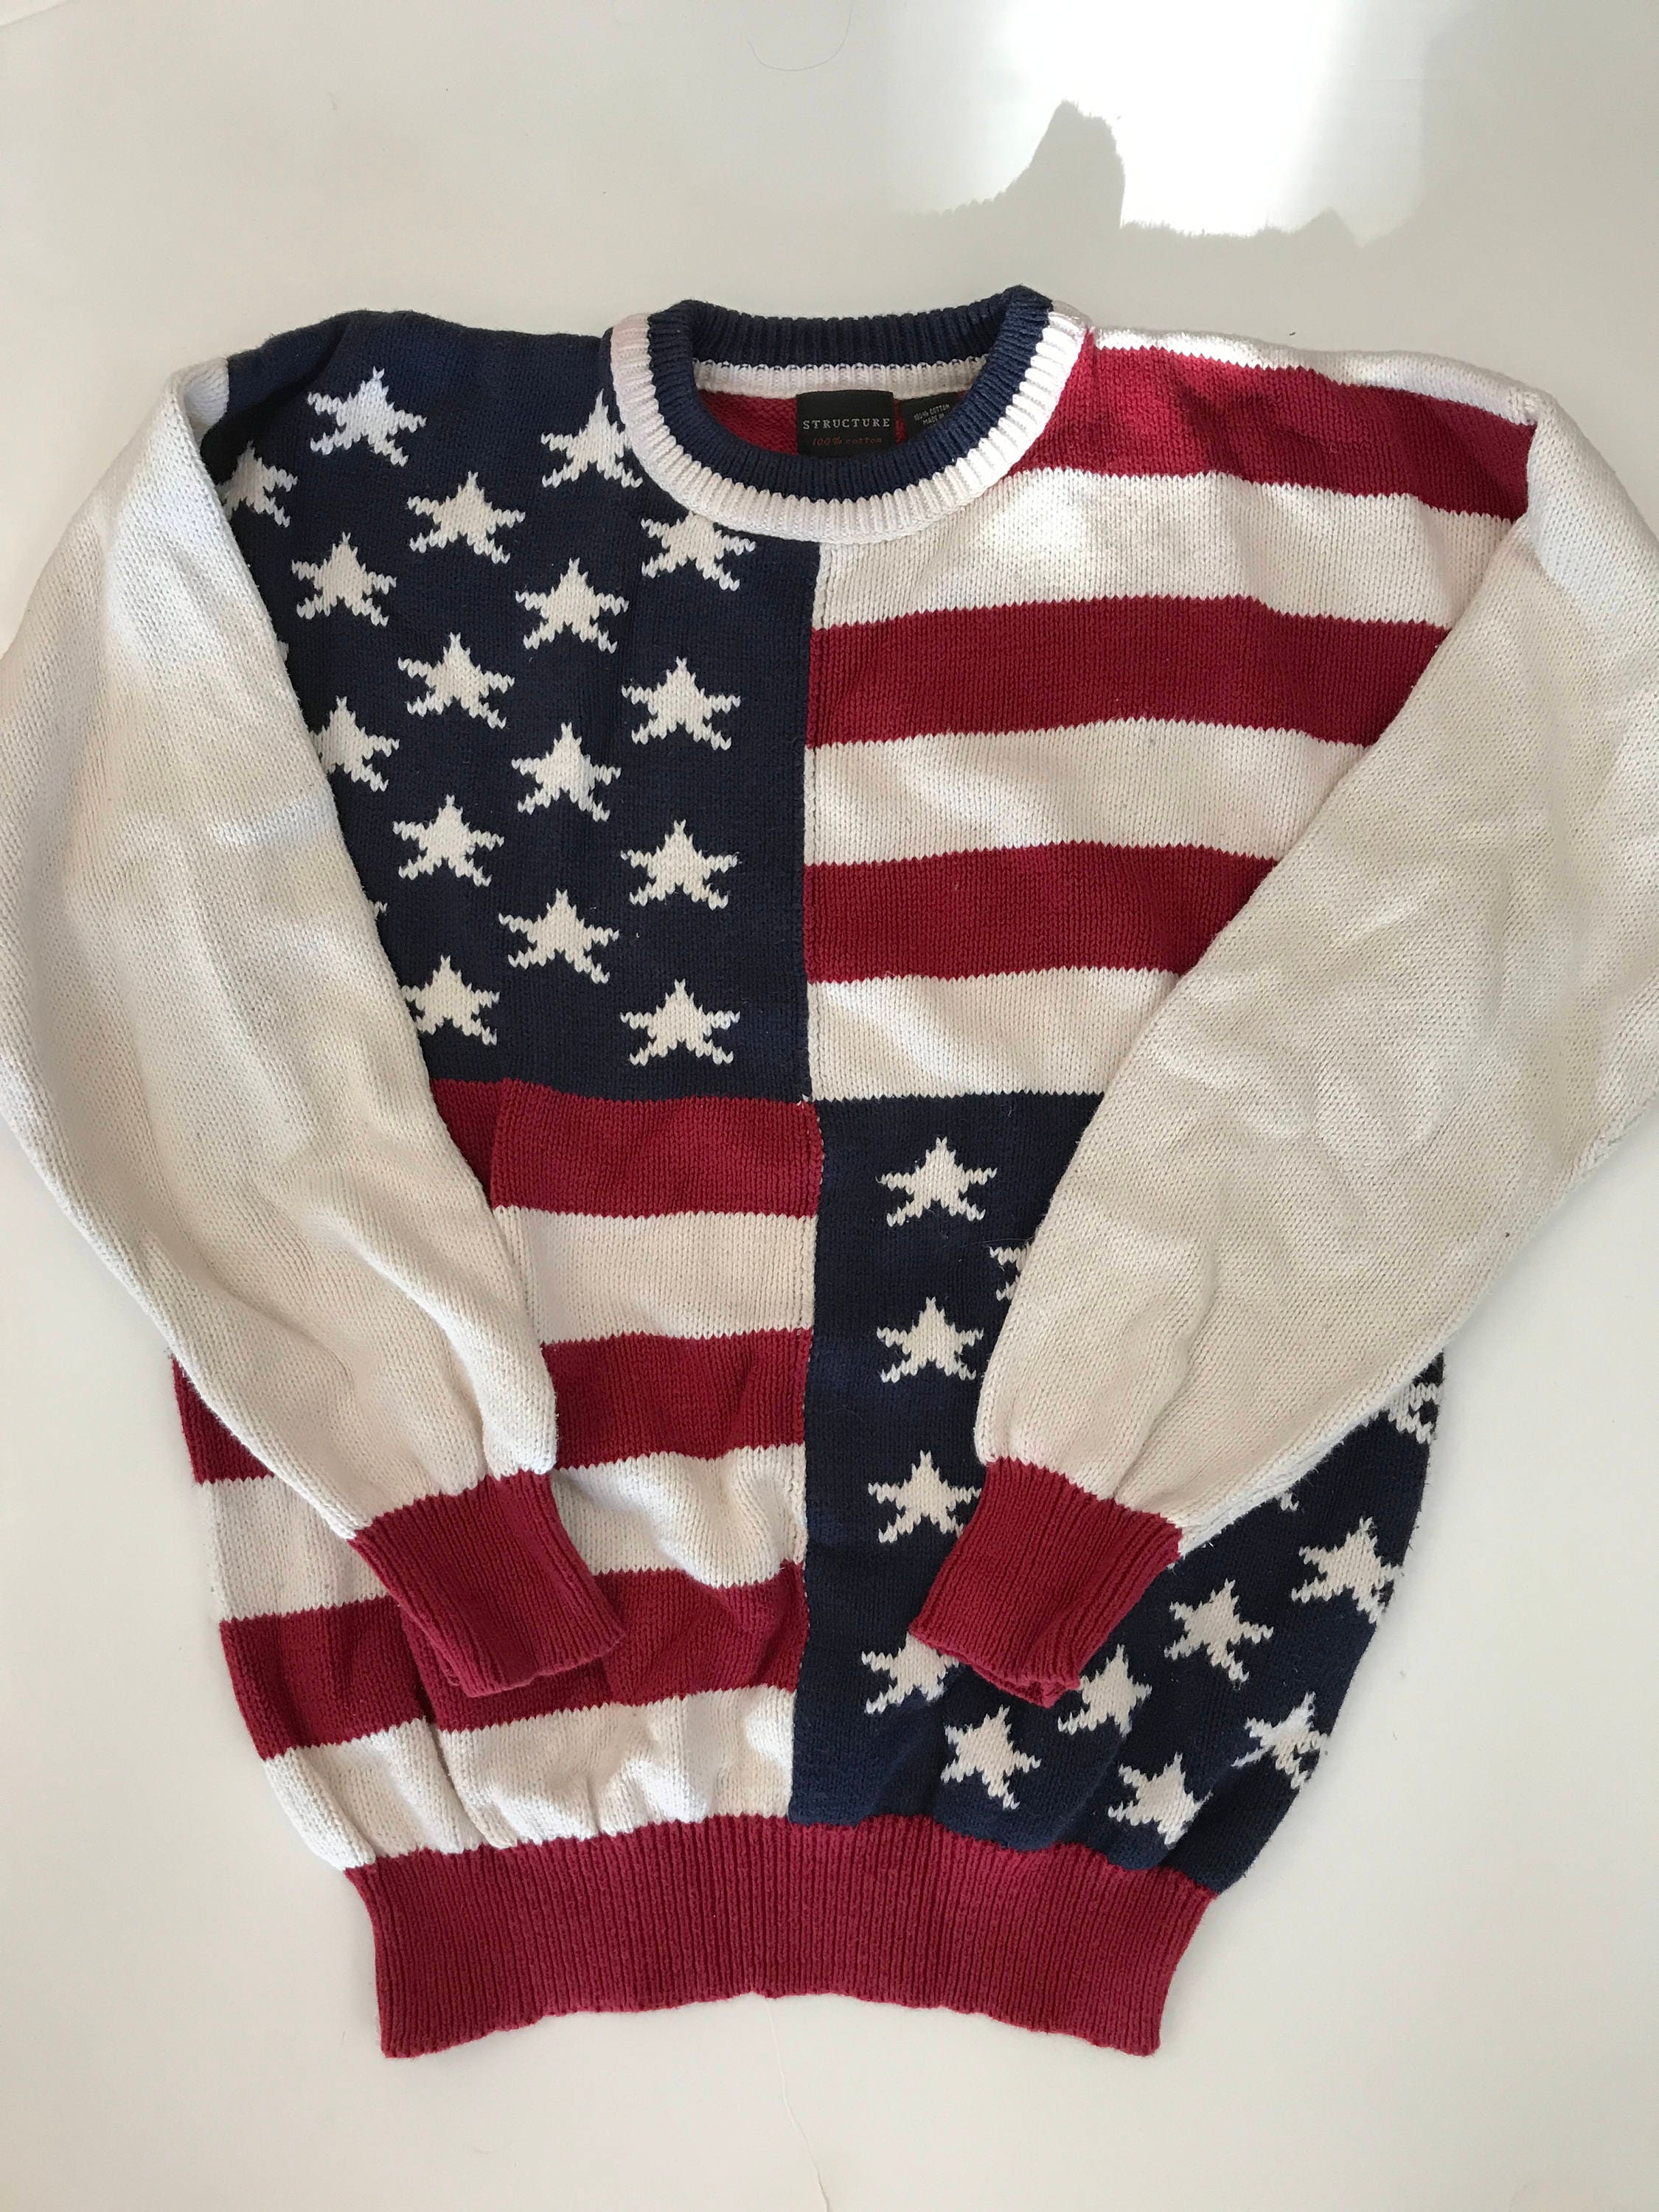 USA Flag Sweater so Cool Cotton Hand Knit W Old Glory Pattern USA Made ...